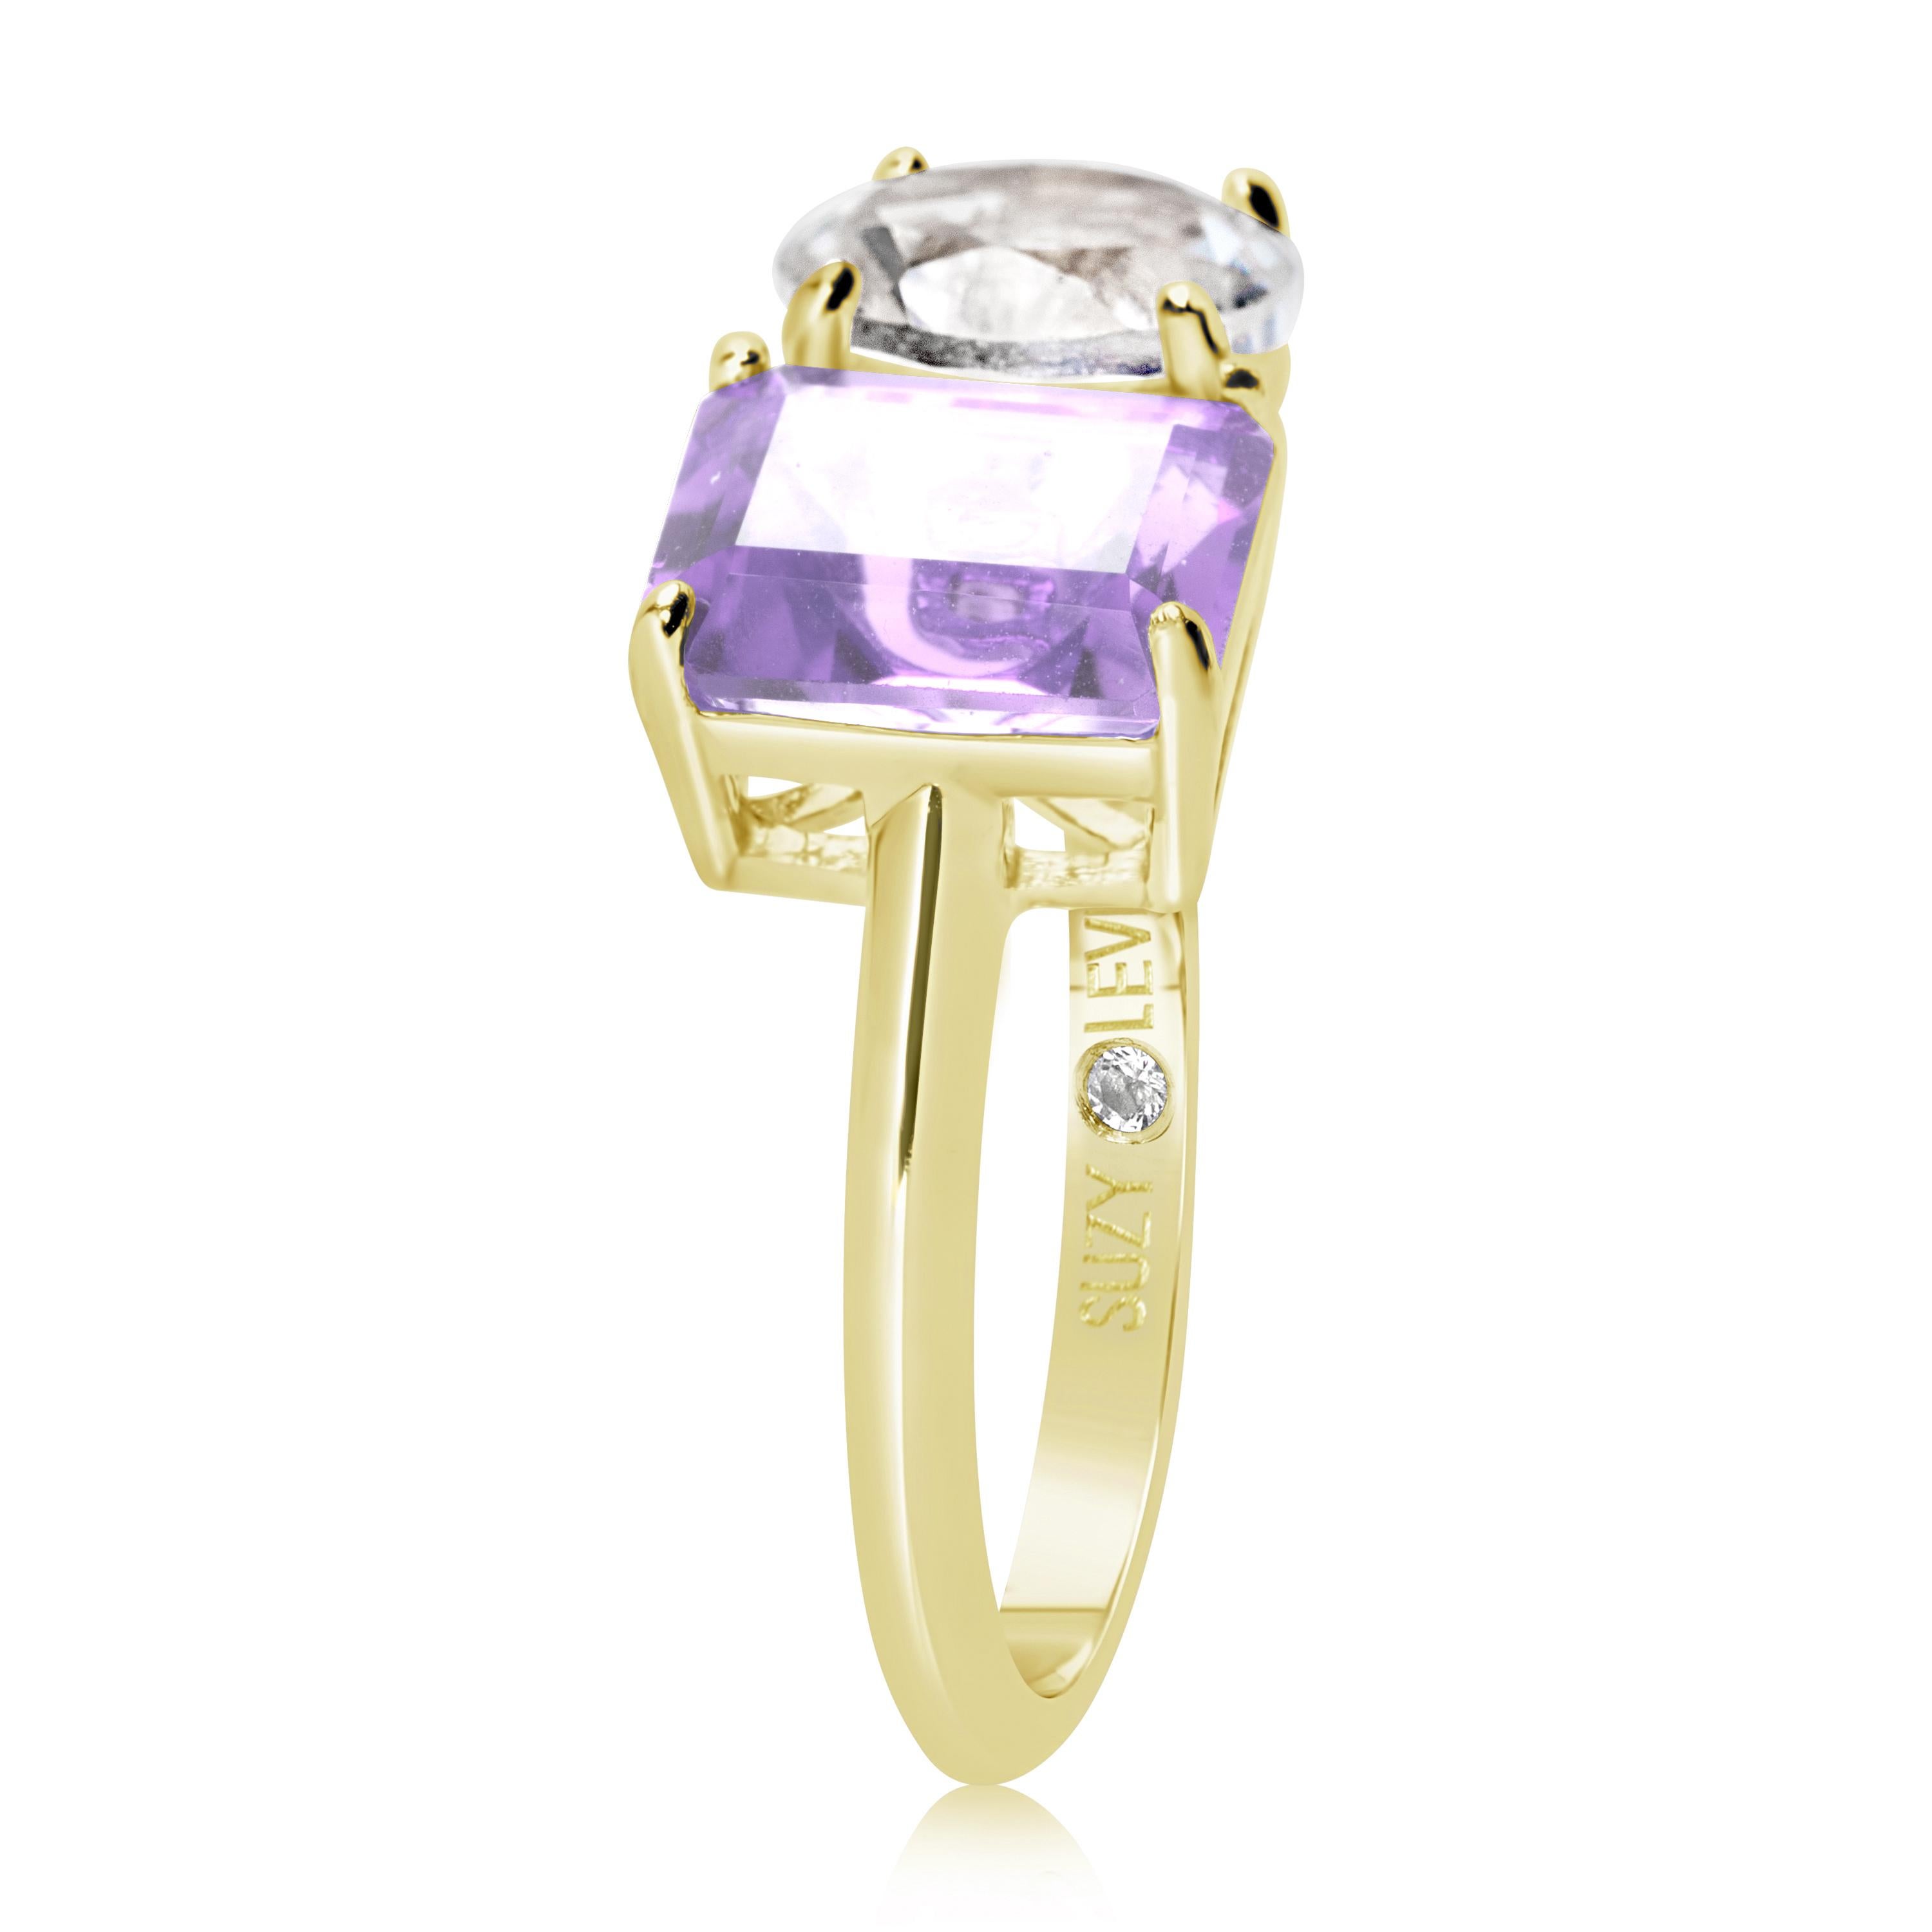 Shimmering in hues of white and purple, this Suzy Levian ring is as on trend as can be, and features a round cut white topaz and an emerald cut purple amethyst as a perfectly matched pair. This ring symbolizes a perfect pairing of unique shapes.